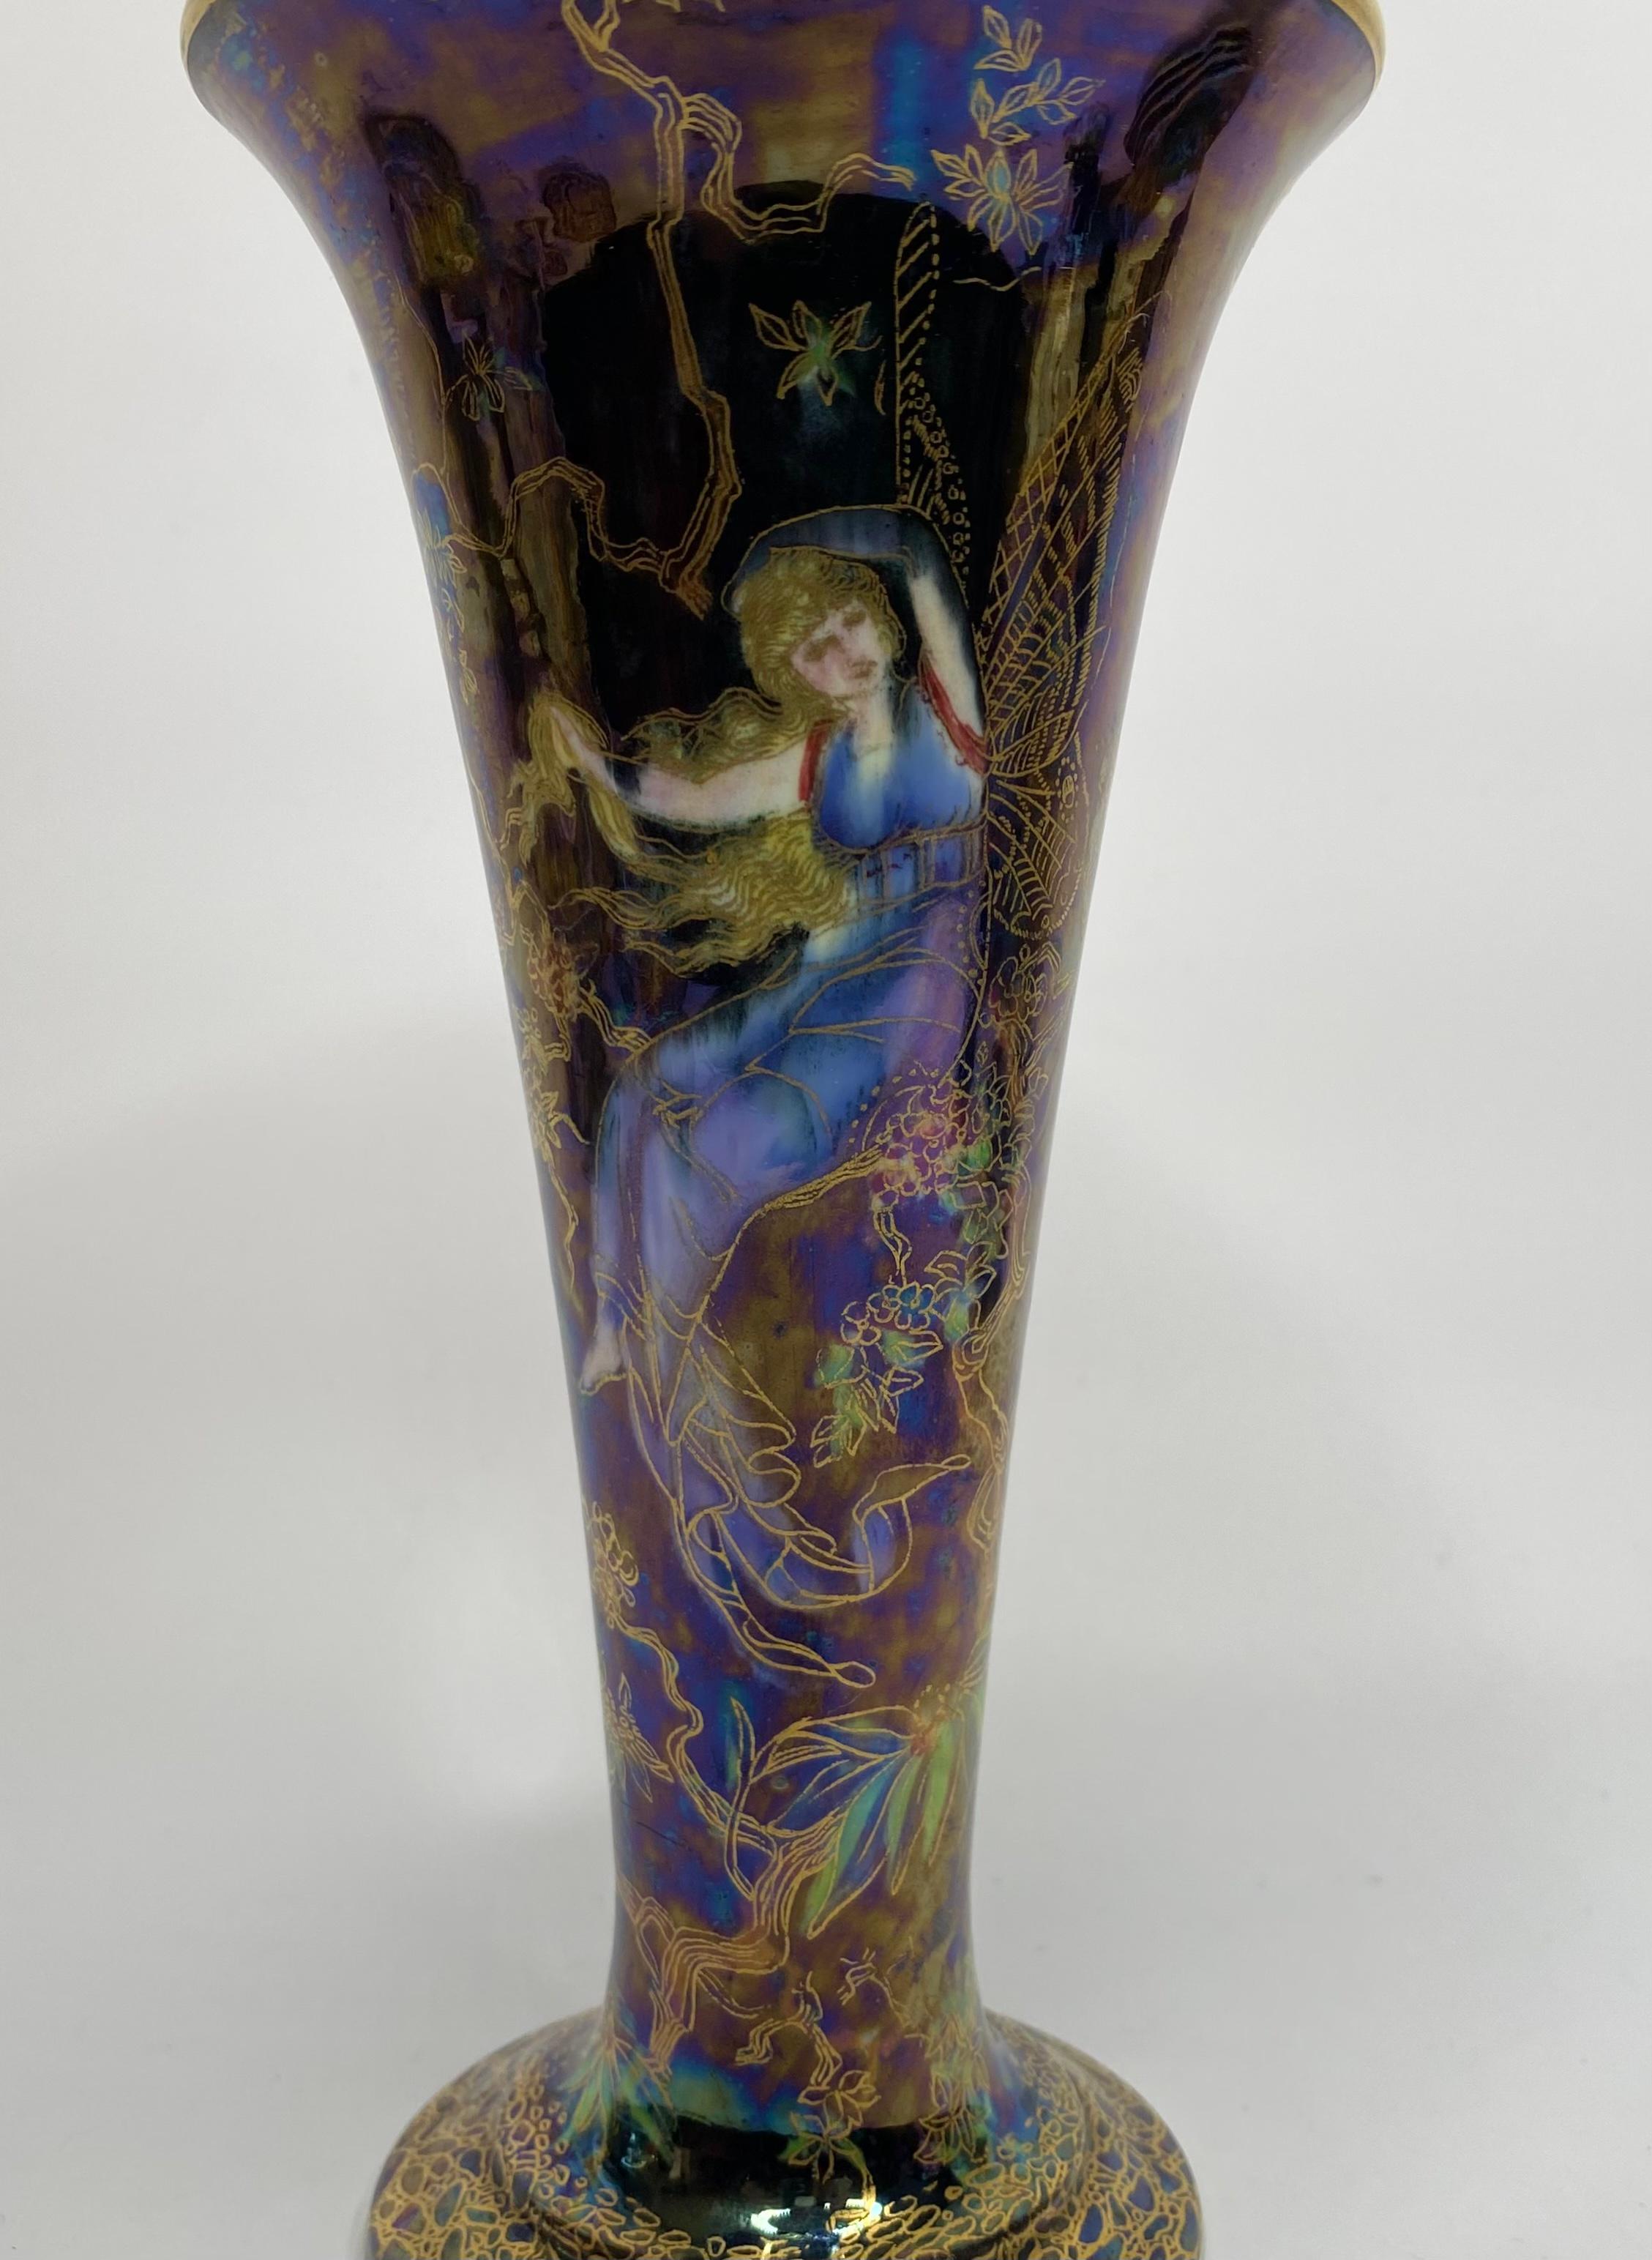 Wedgwood Fairyland lustre vase ‘Butterfly Women’, circa 1925.

£1,950.00
Wedgwood Fairyland Lustre vase, circa 1925. The Daisy Makeig-Jones designed conical shaped vase, decorated with the ‘Butterfly Women’ pattern, of fairies sat amongst